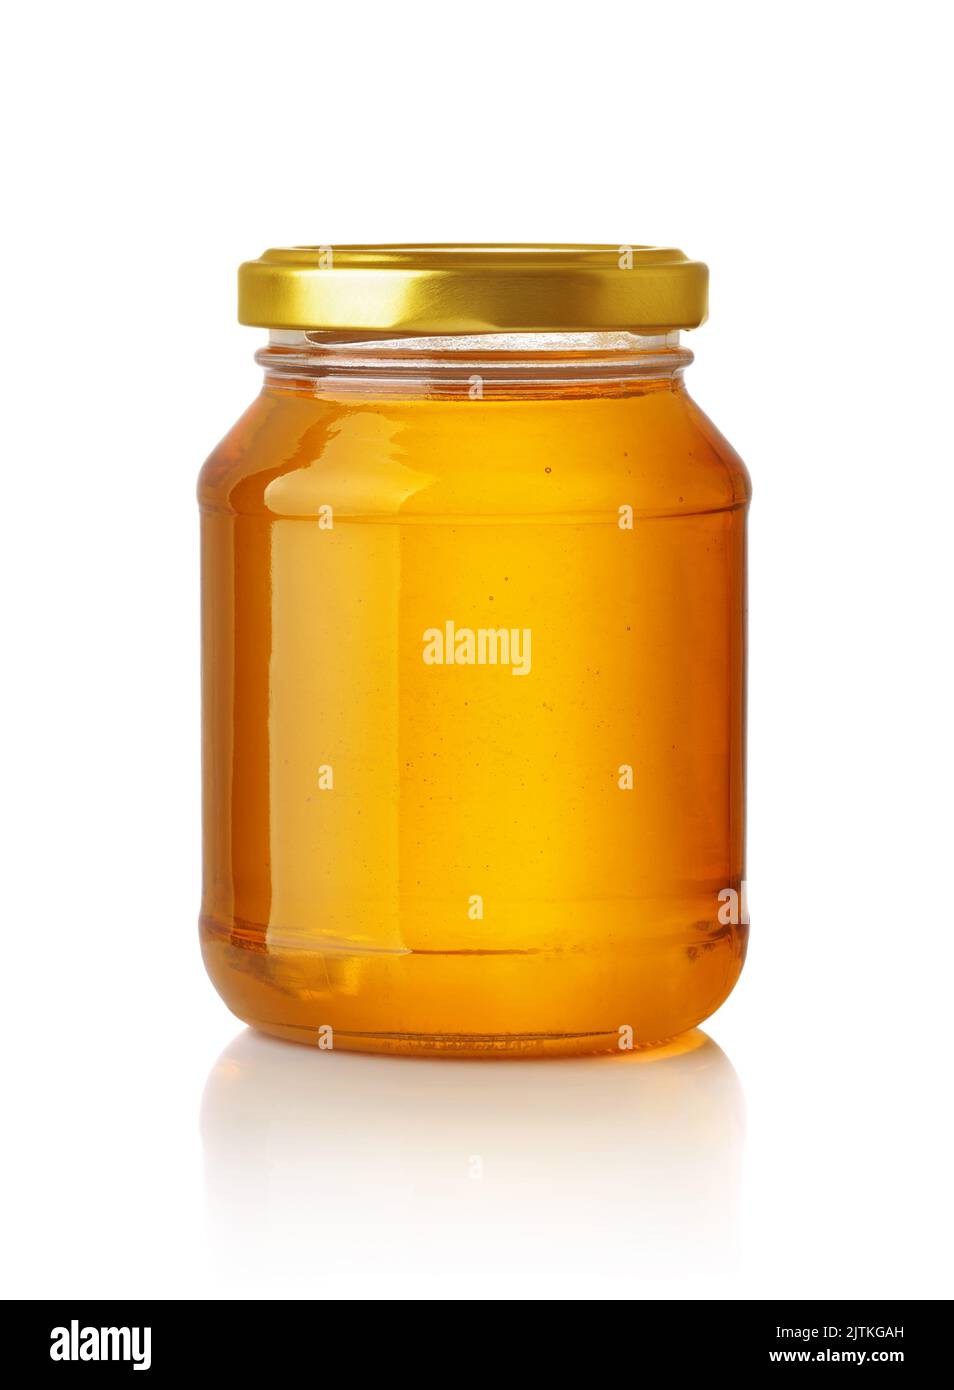 Front view of honey glass jar isolated on white Stock Photo